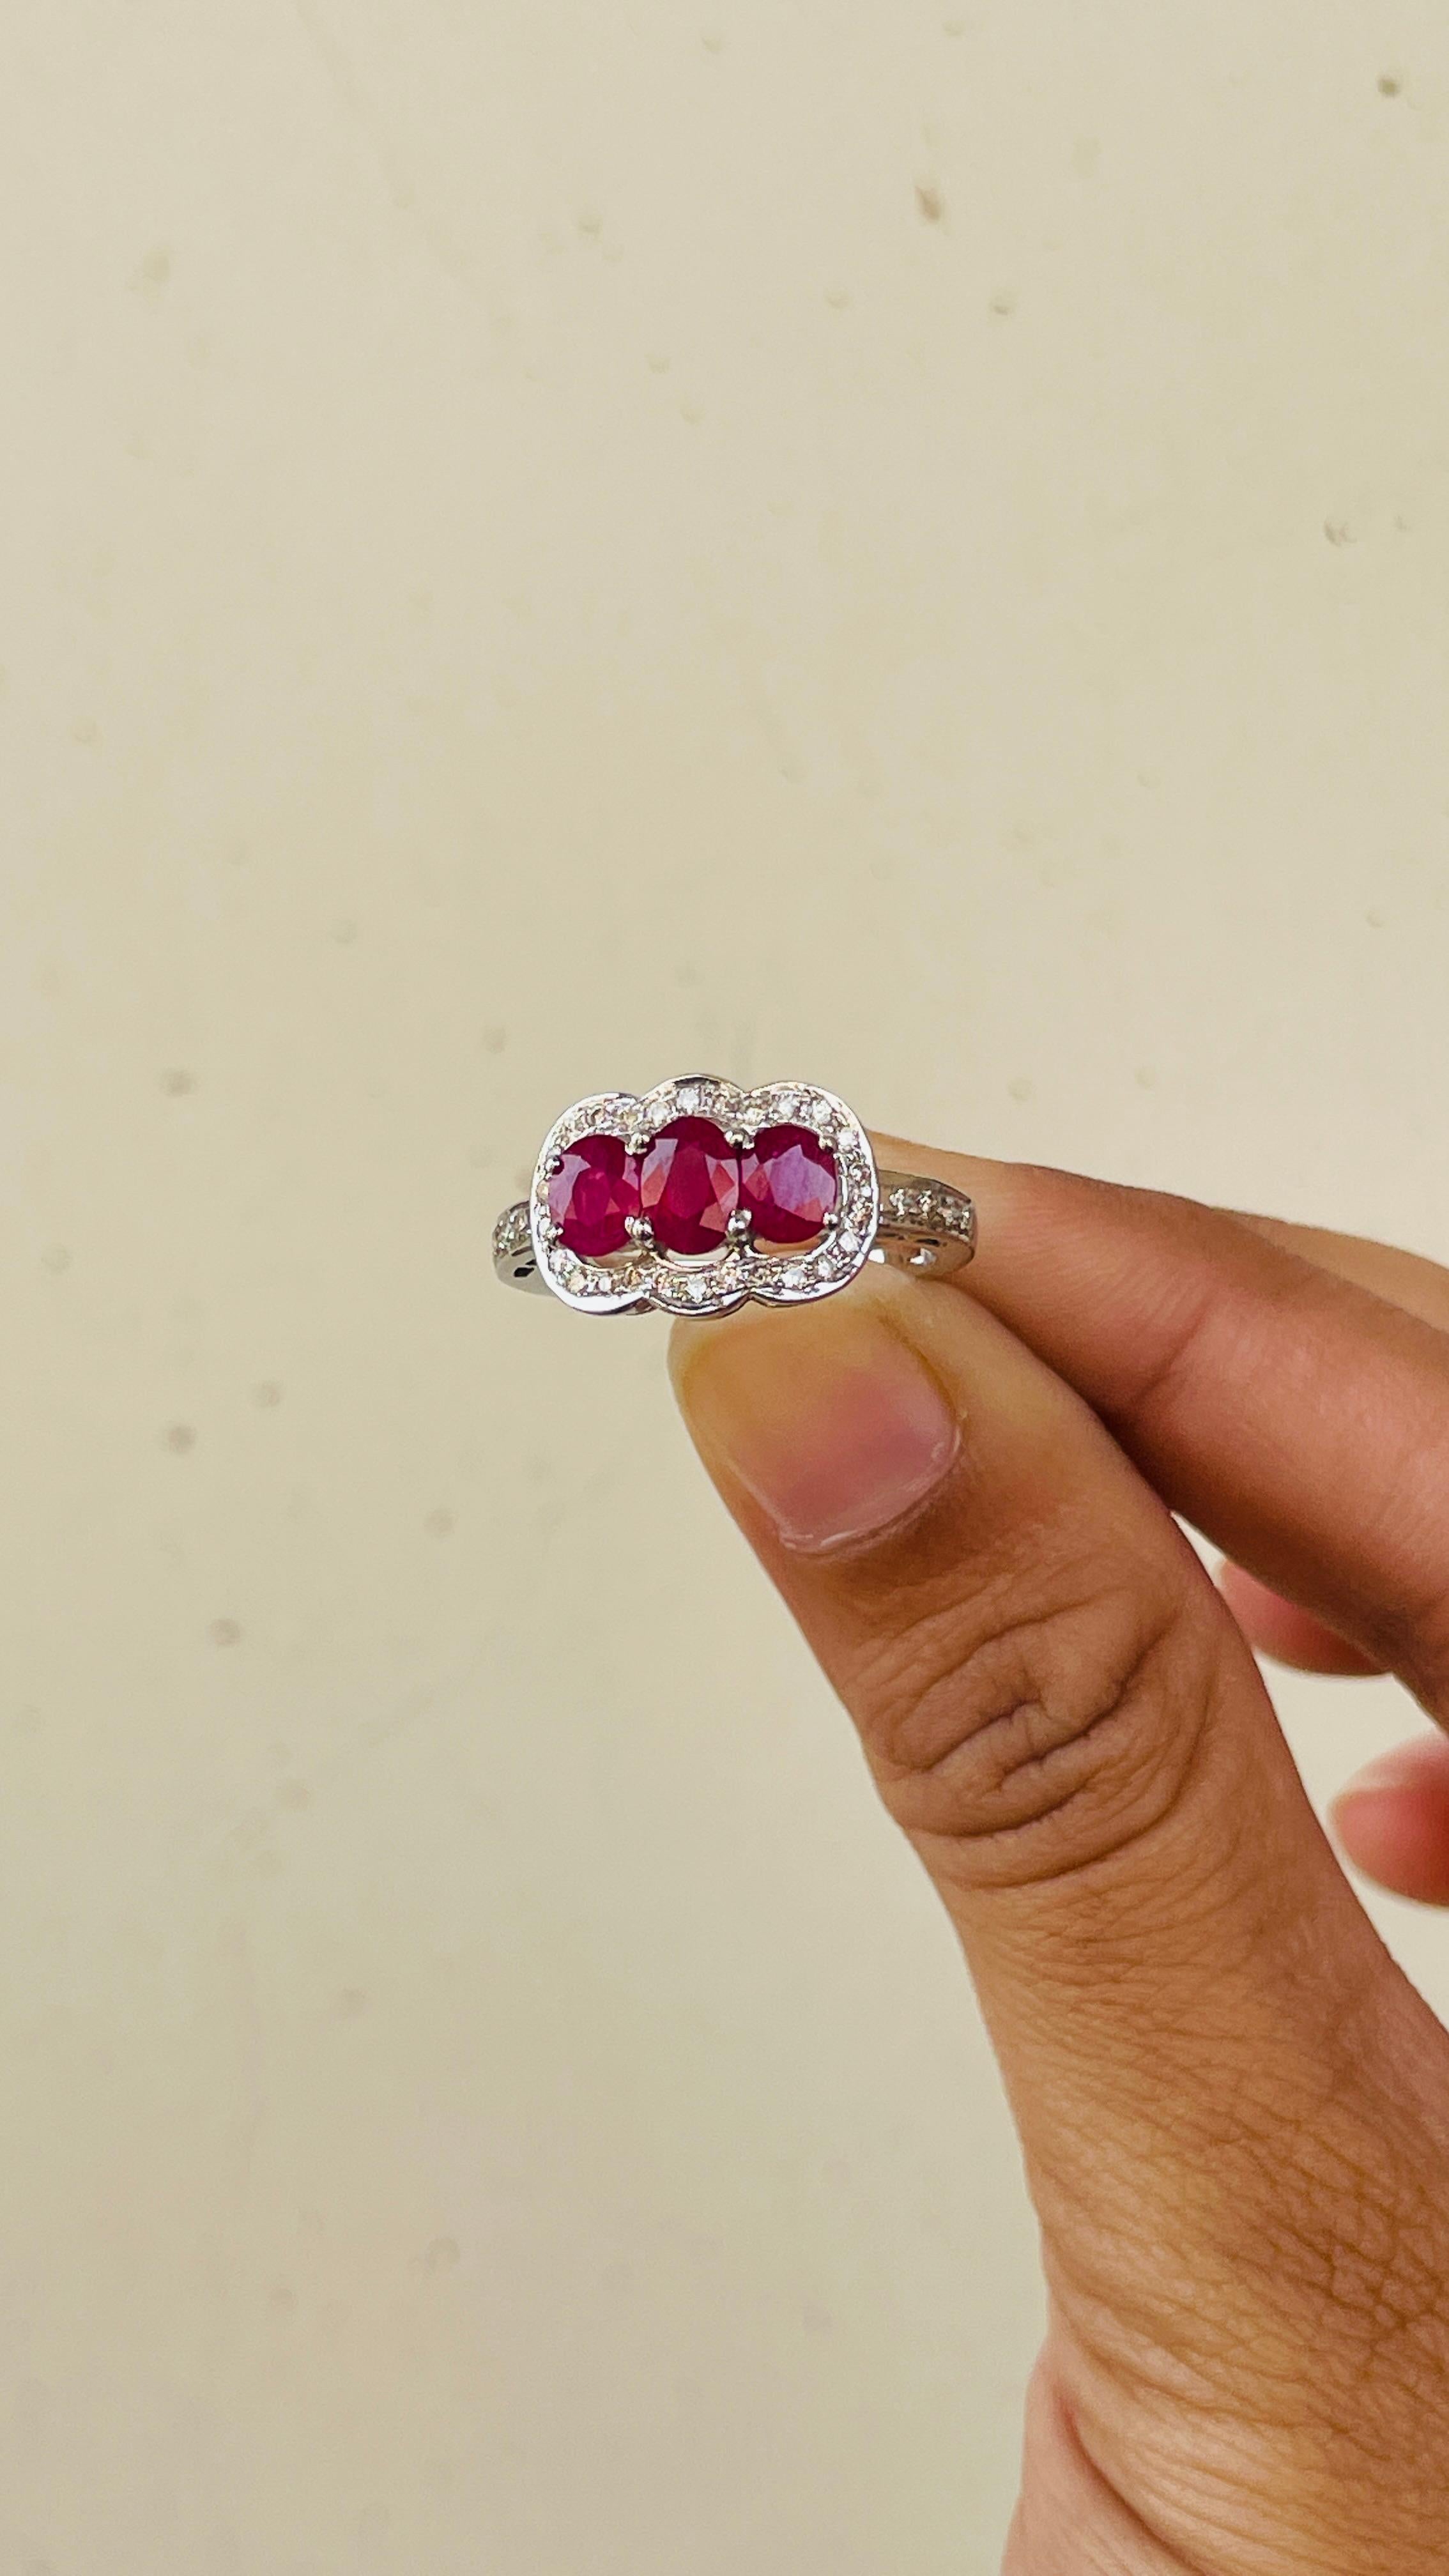 For Sale:  Oval Cut Three Stone Ruby Engagement Ring in 18K White Gold with Diamonds 4